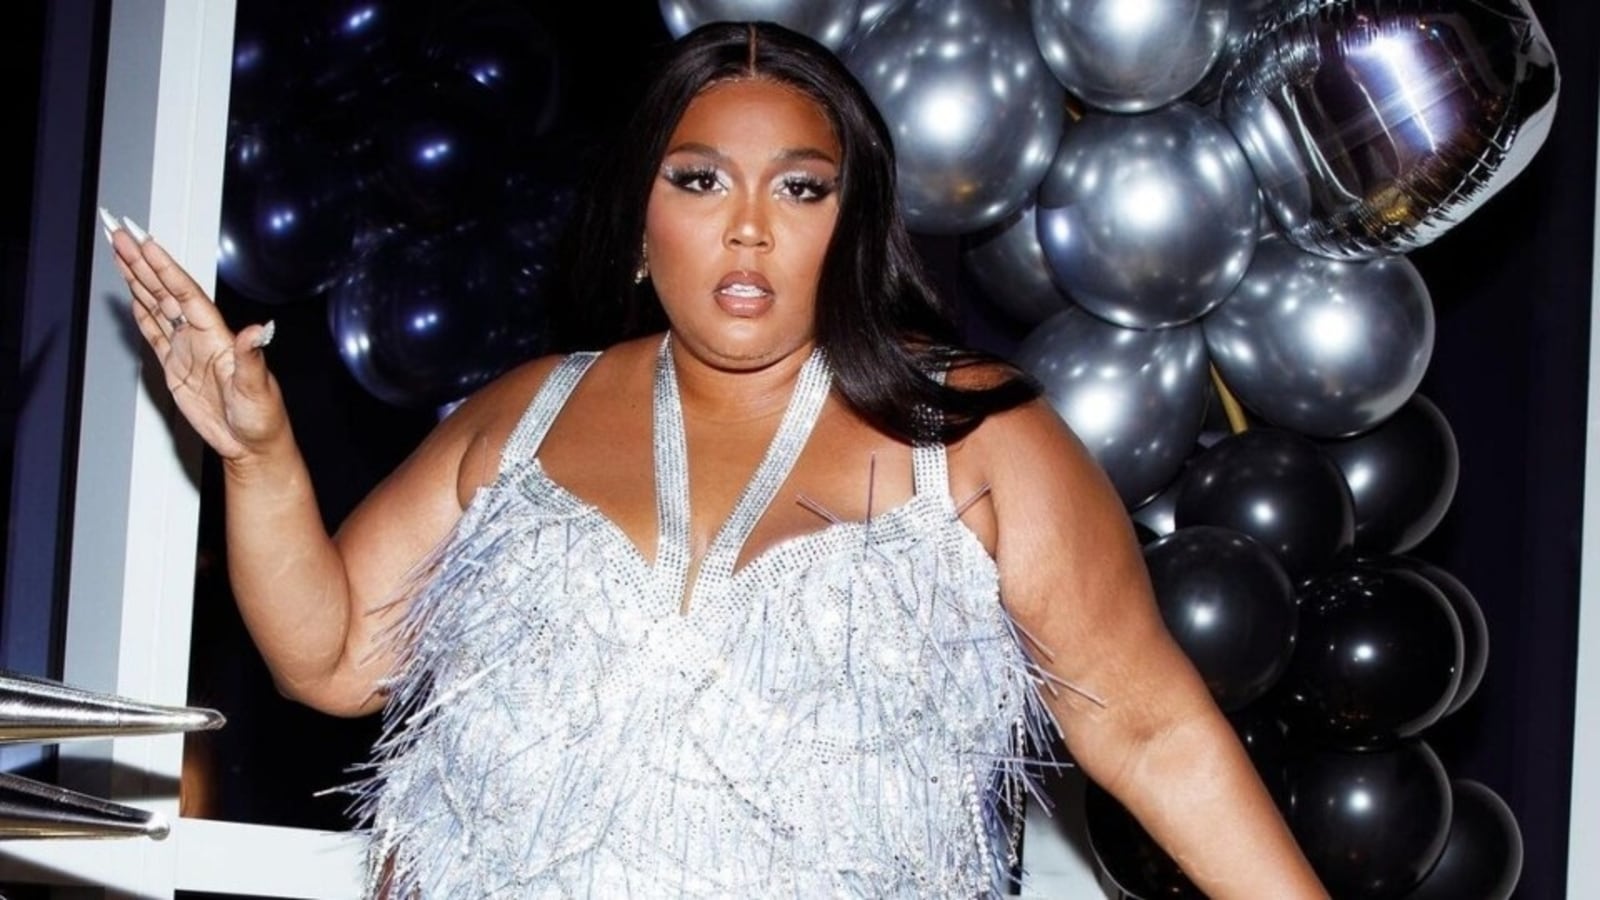 Lizzo launches inclusive shapewear brand Yitty, says ‘This is a love letter to my big girls and welcome to Every Body’